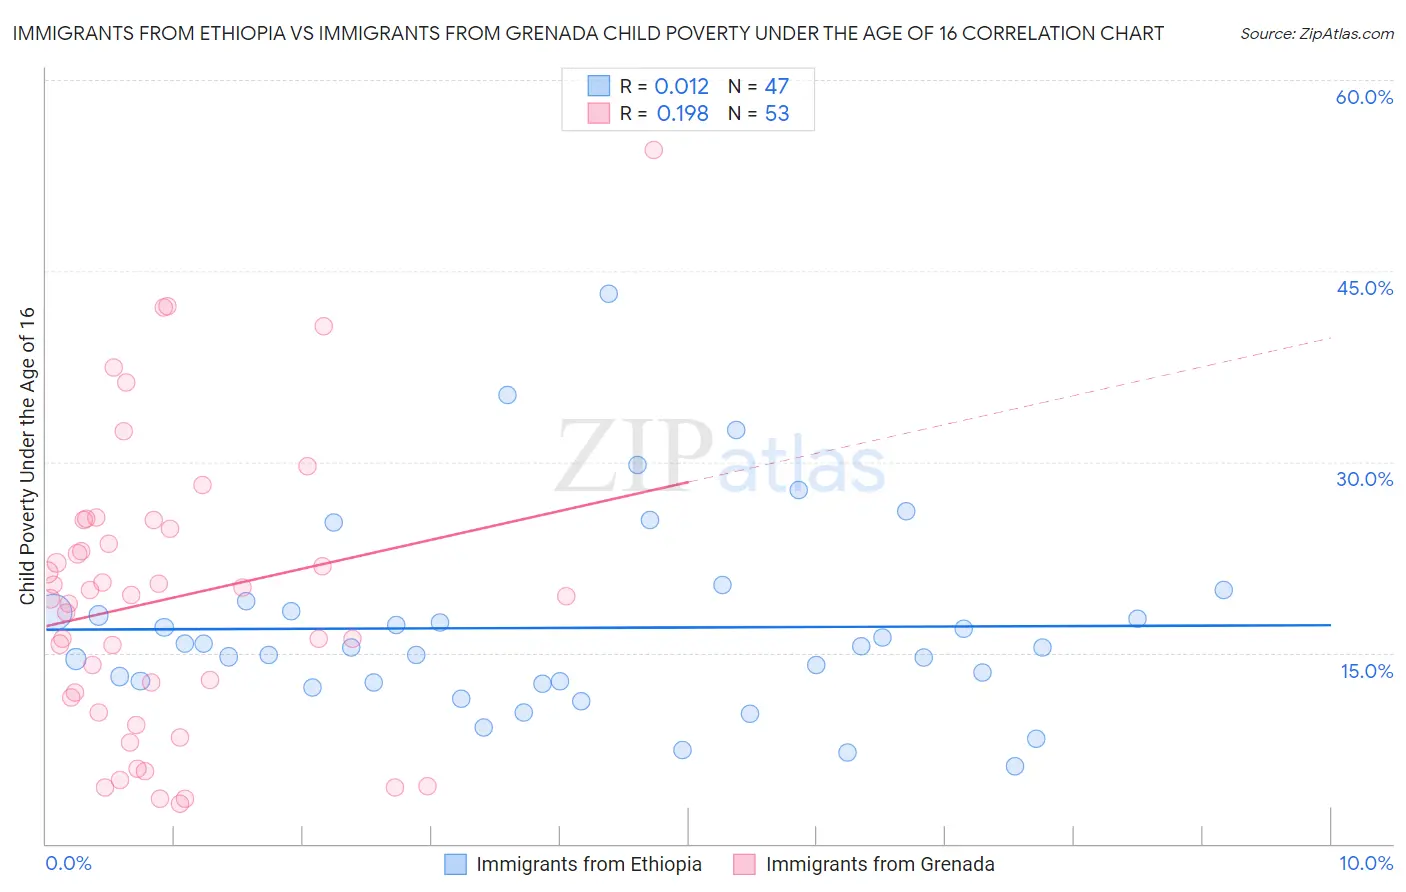 Immigrants from Ethiopia vs Immigrants from Grenada Child Poverty Under the Age of 16